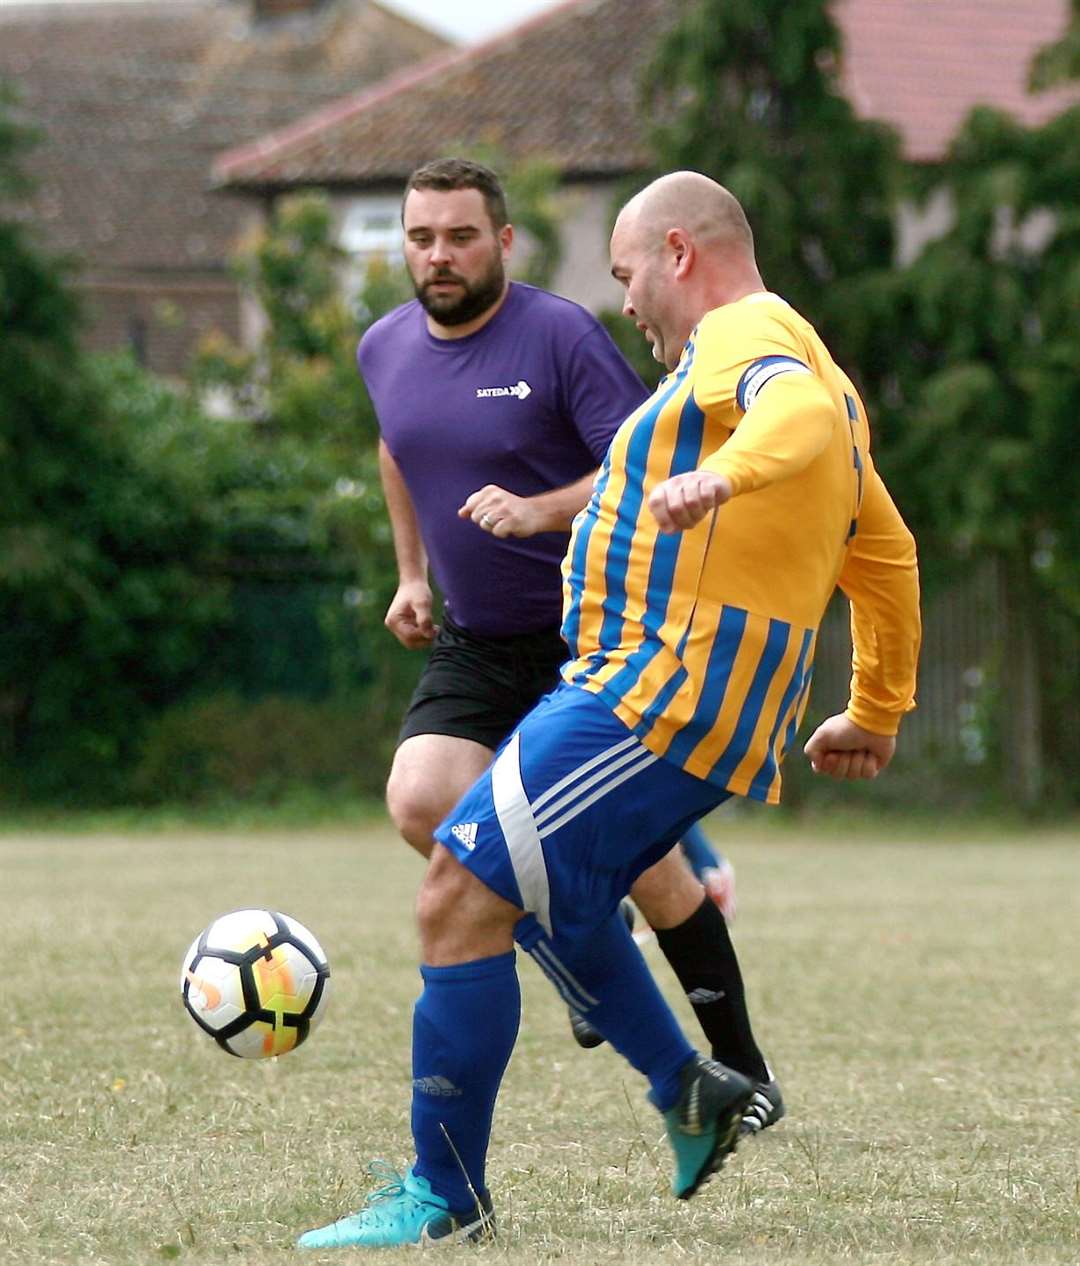 The charity football match was staged at Sheerness East Working Mans Club